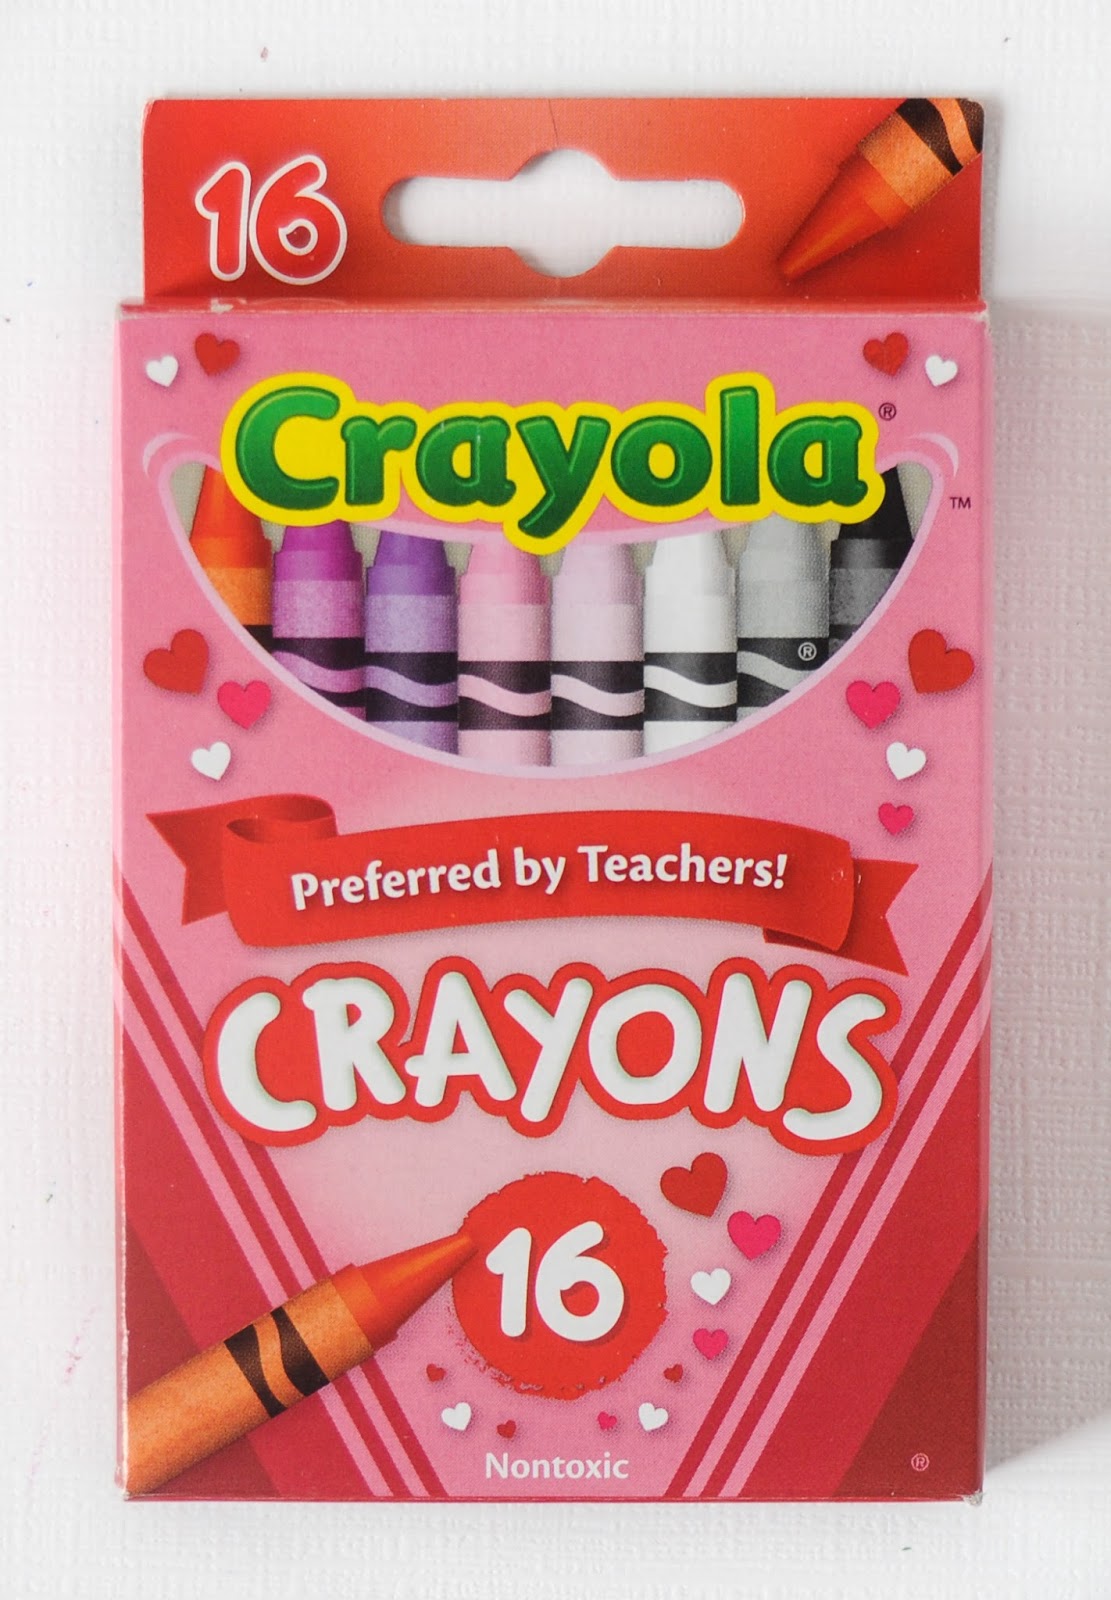 Colorful Crayon Valentine – The CentsAble Shoppin